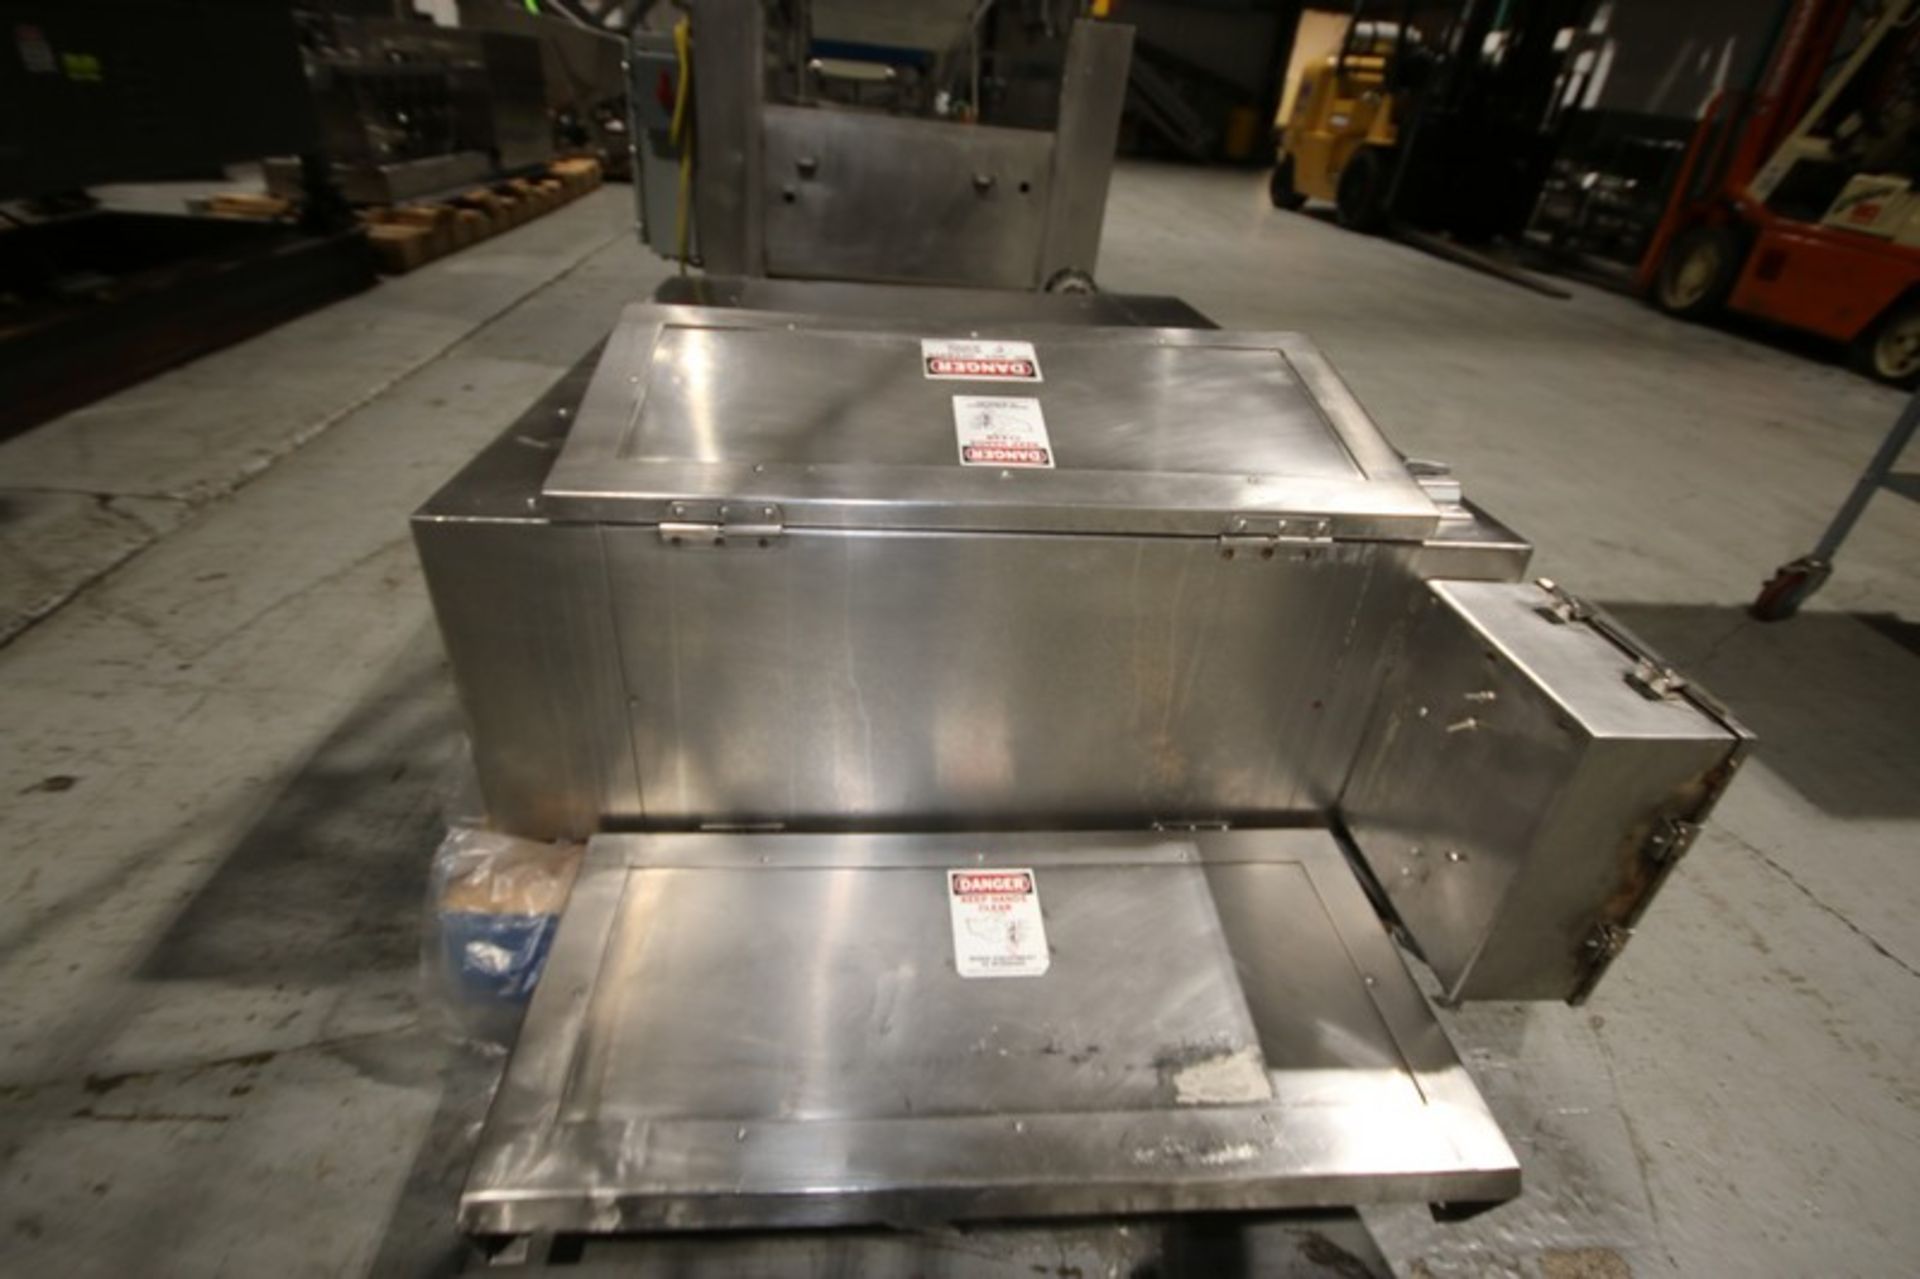 Moline 23-1/2" W S/S Guillotine, with Aprox. 24-1/2" L x 8-1/2" W Cutting Table, Mounted on S/S - Image 6 of 7